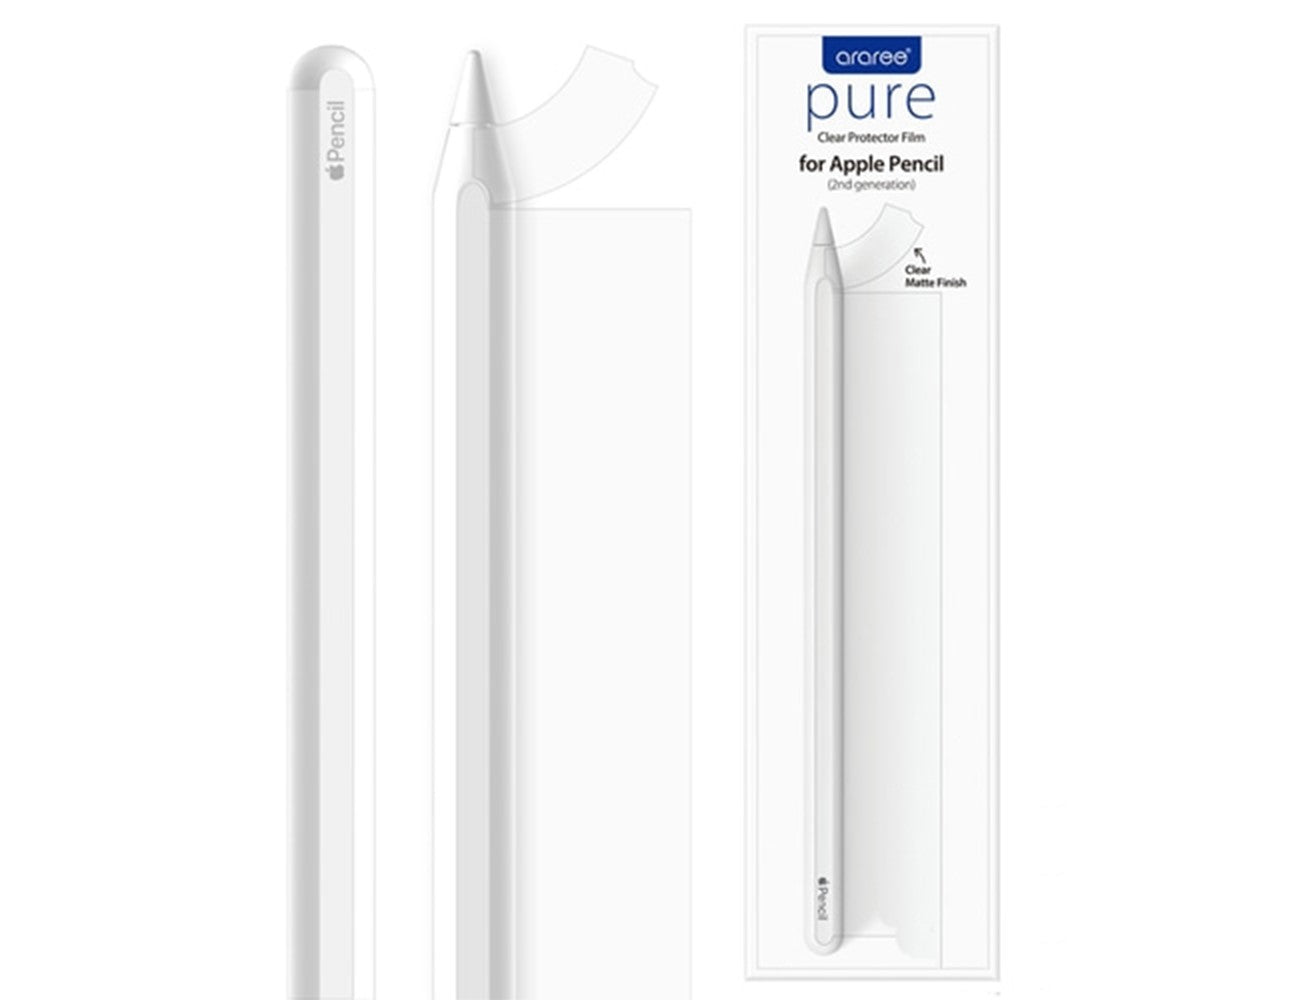 Araree Pure Clear Protector Film For Apple Pencil 2nd Generation - Clear Matte Finish